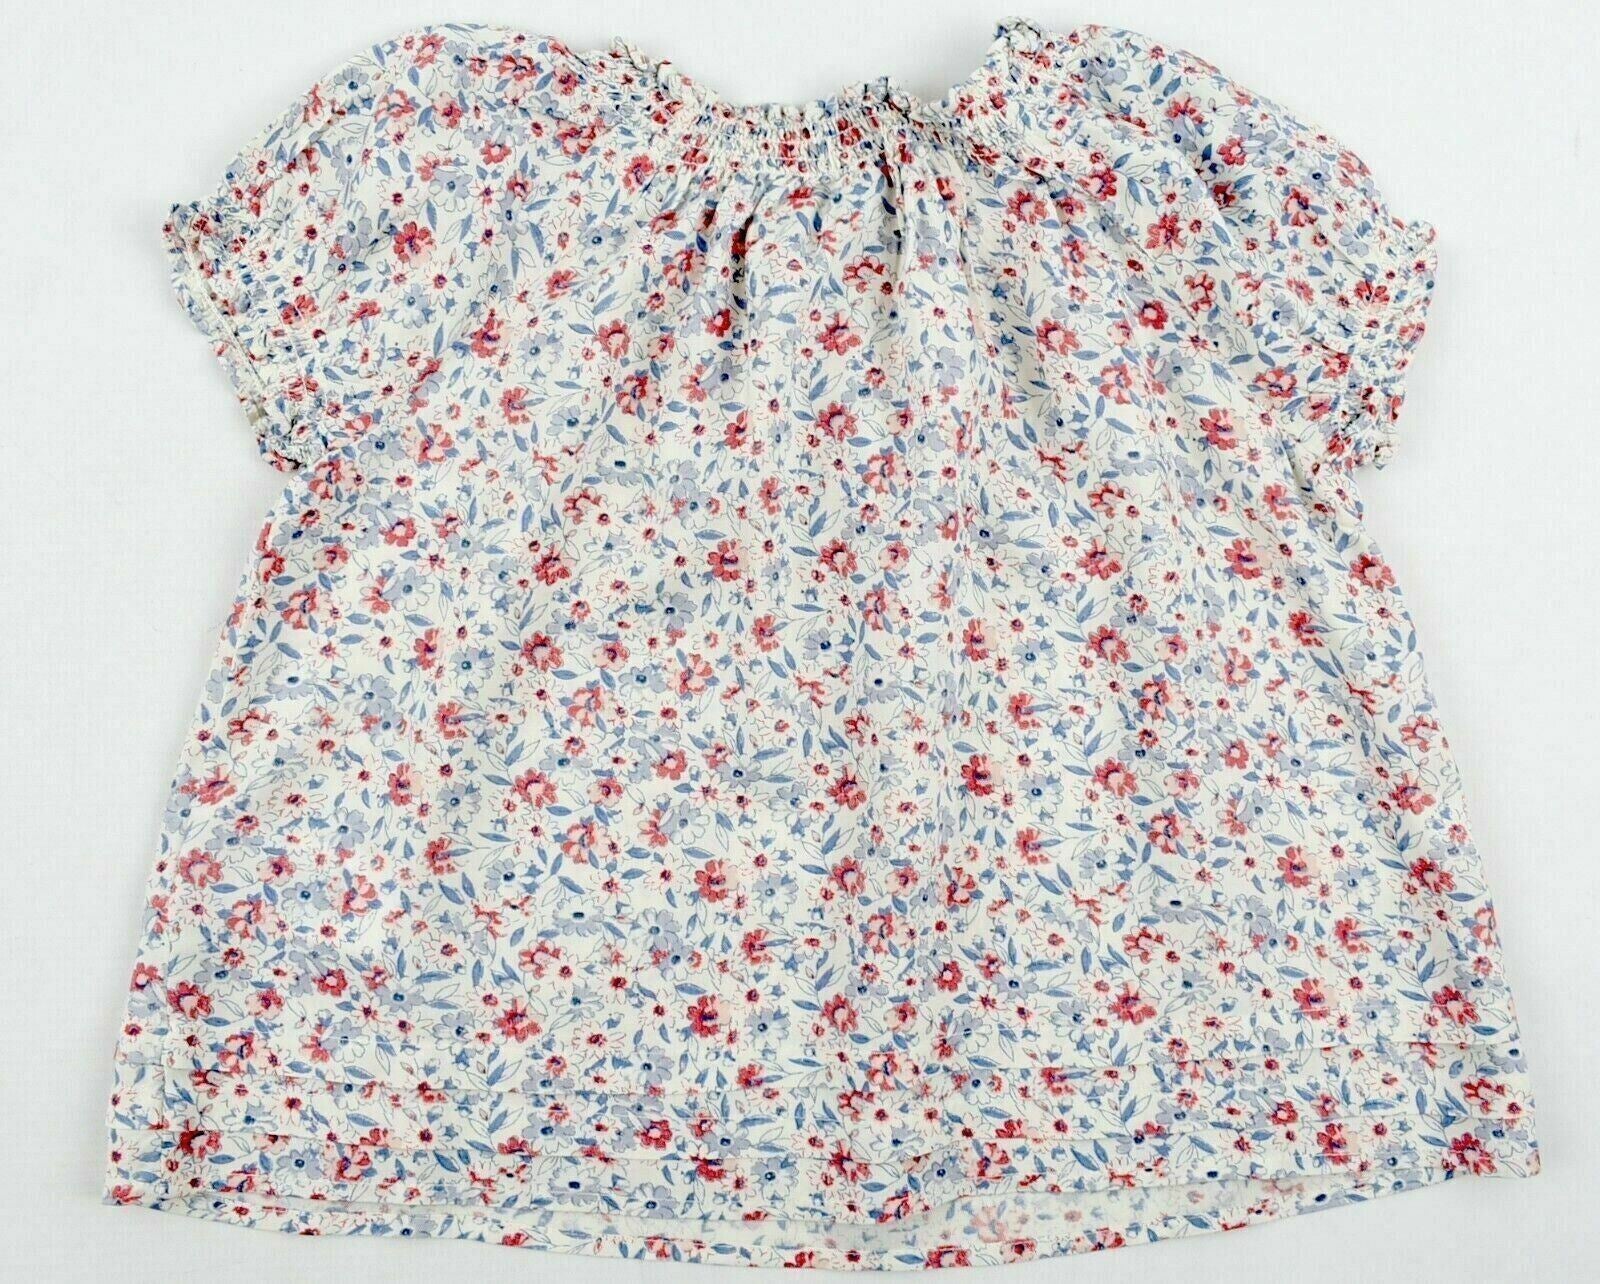 POLO RALPH LAUREN Girls' Short Sleeve Floral Tunic Top, size 6-7 years